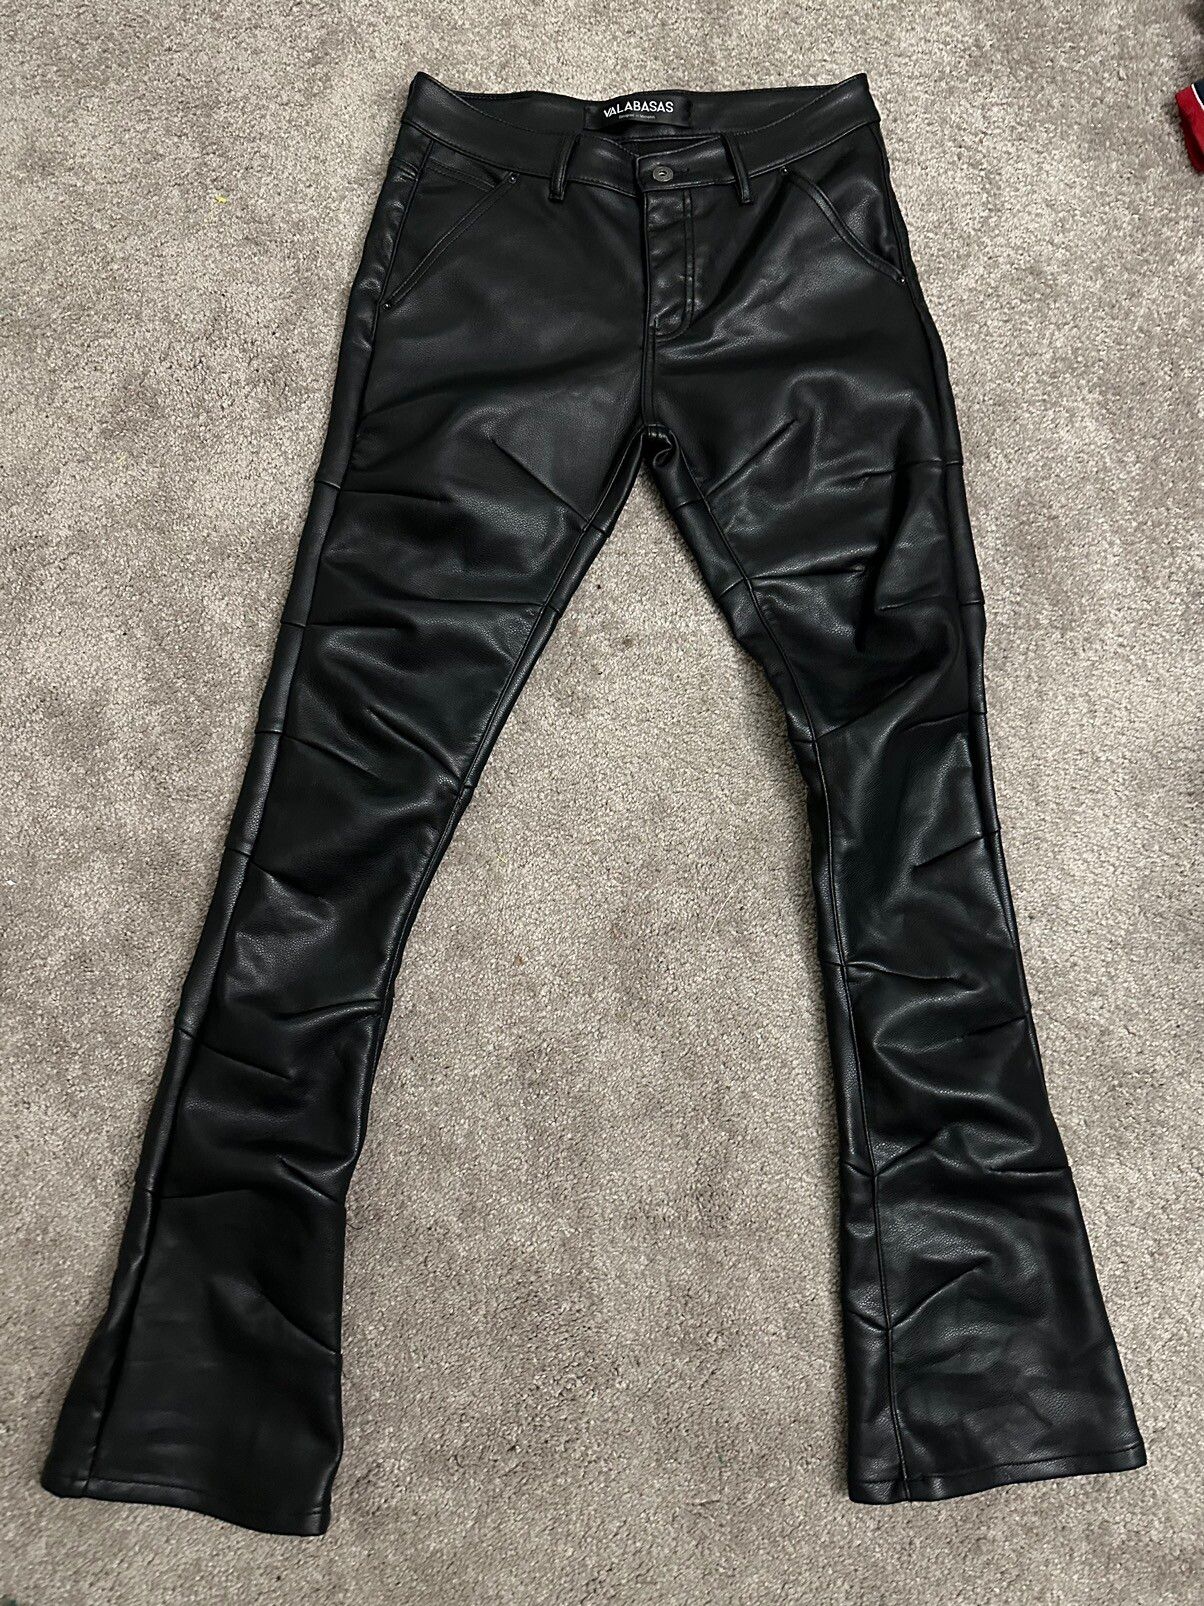 Hype Valabasas Leather Pants | Grailed